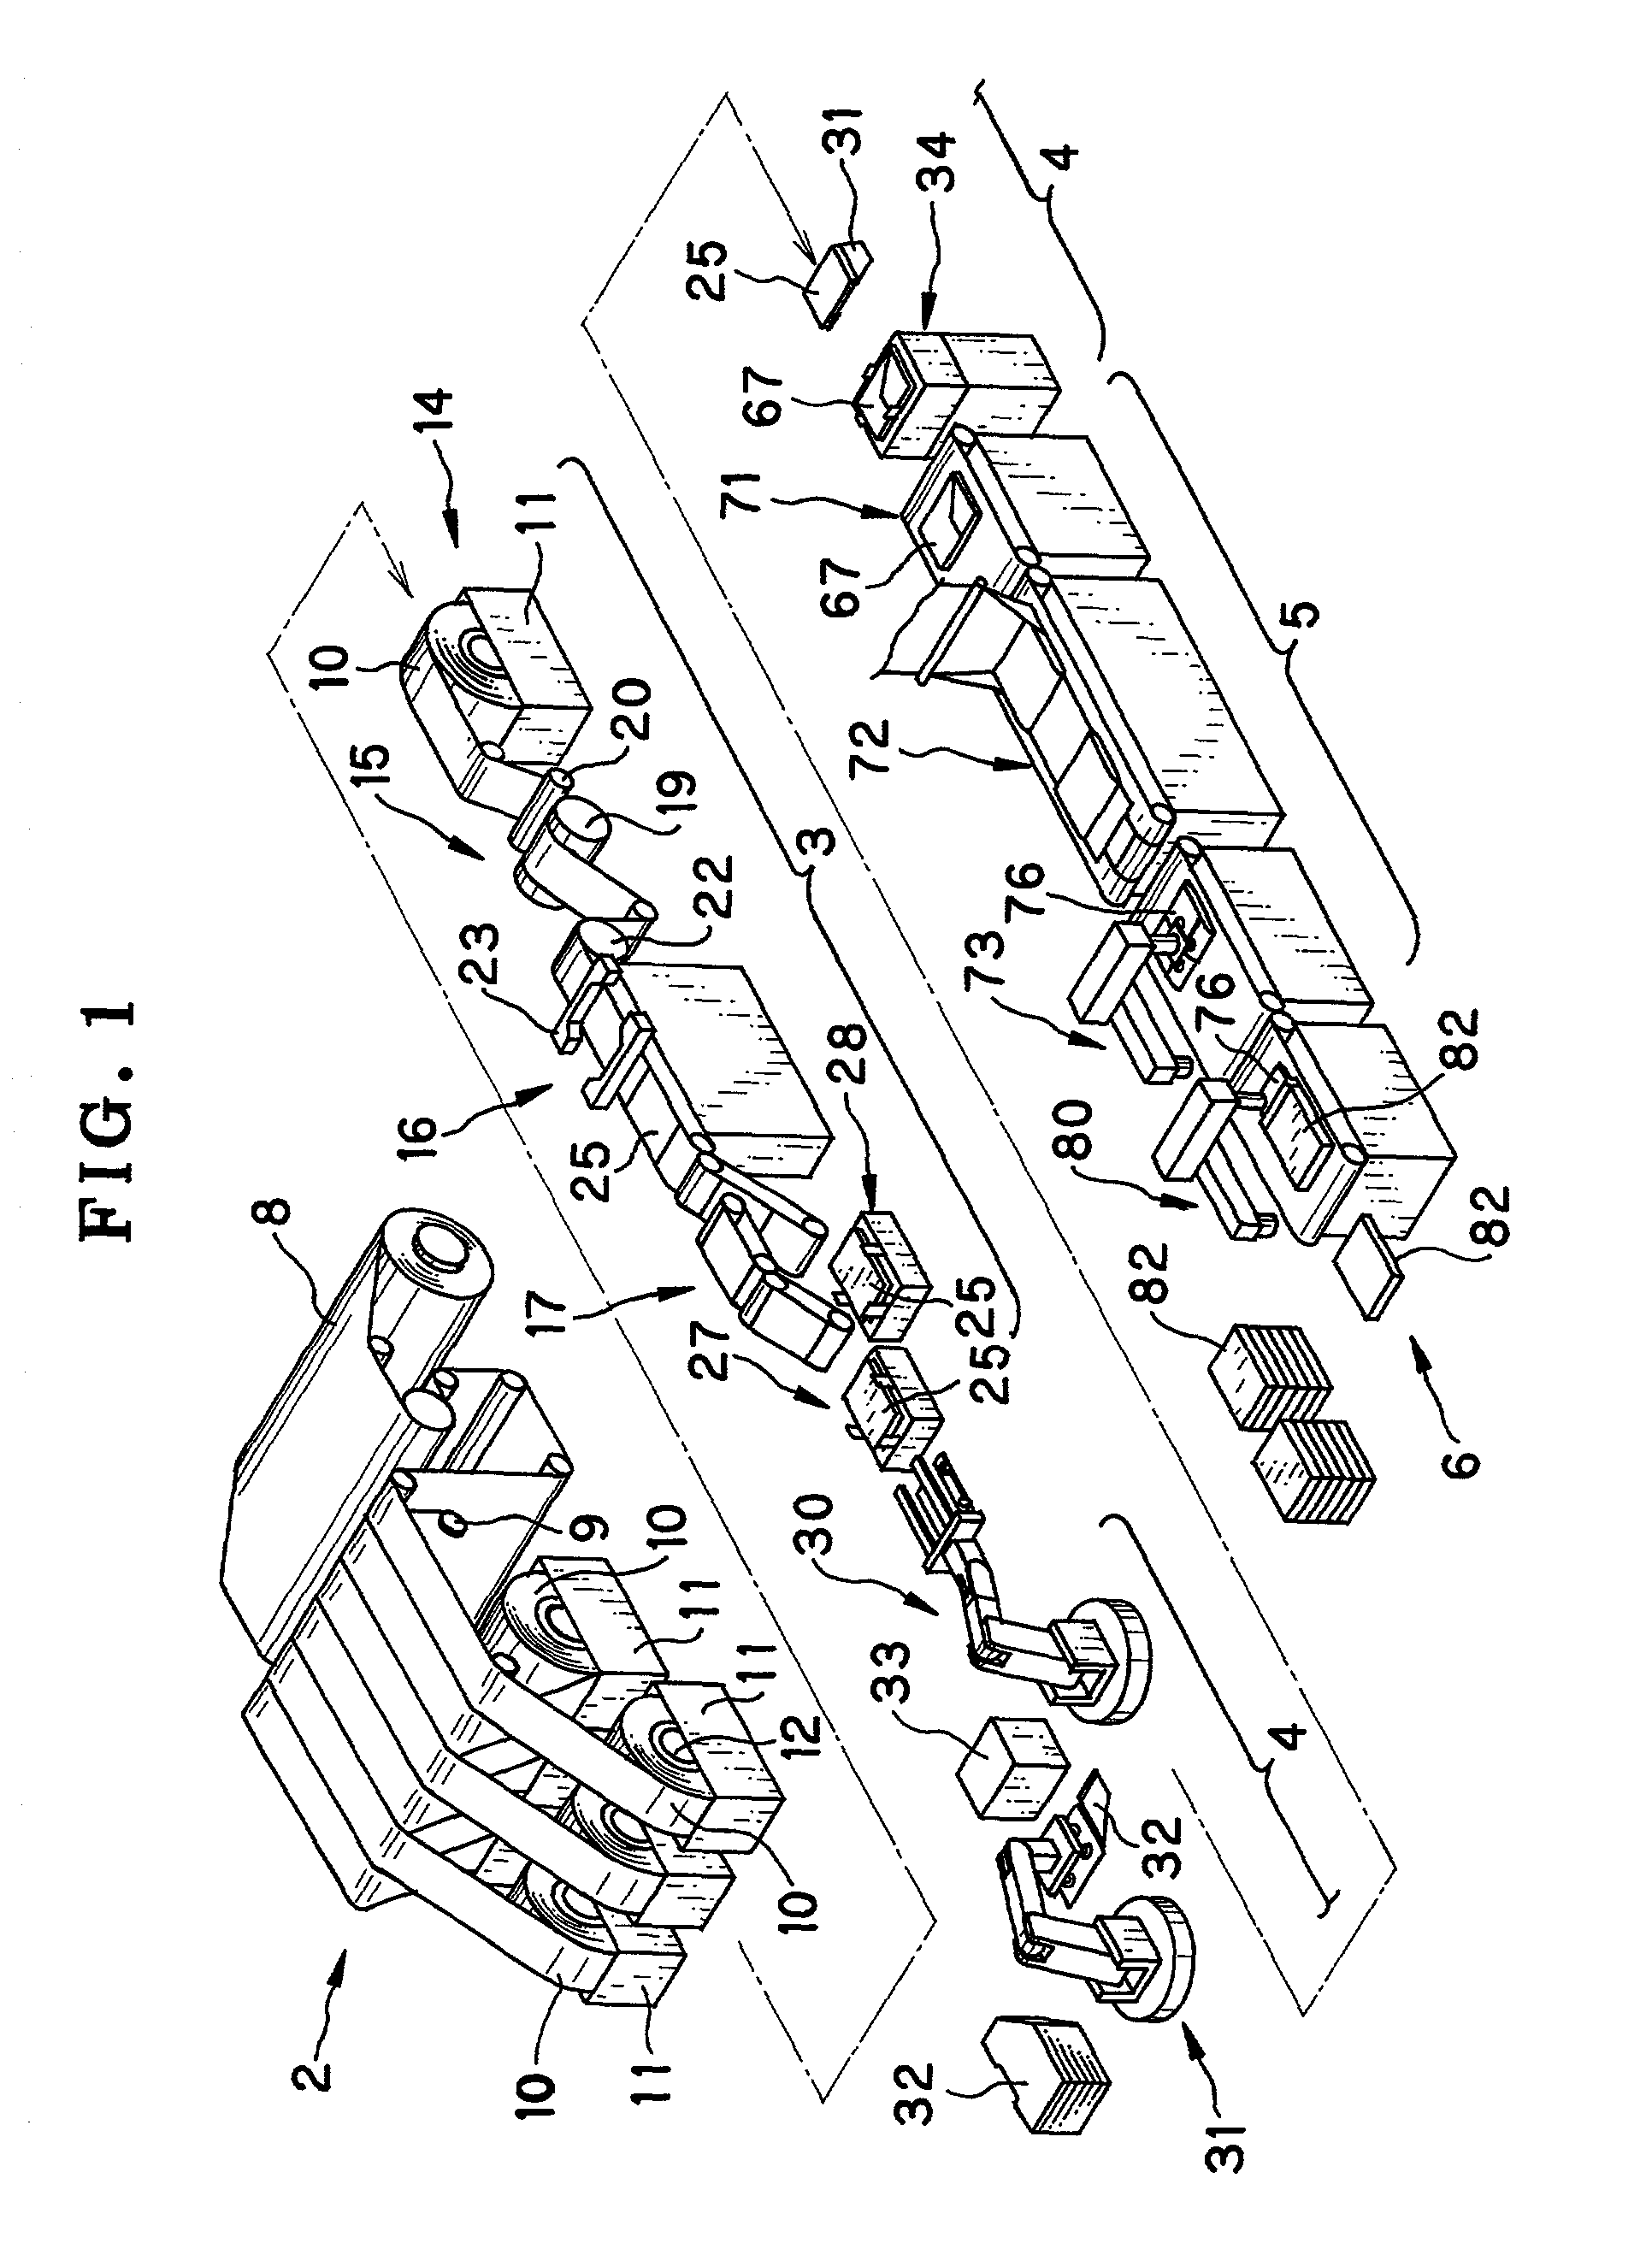 Sheet package producing system